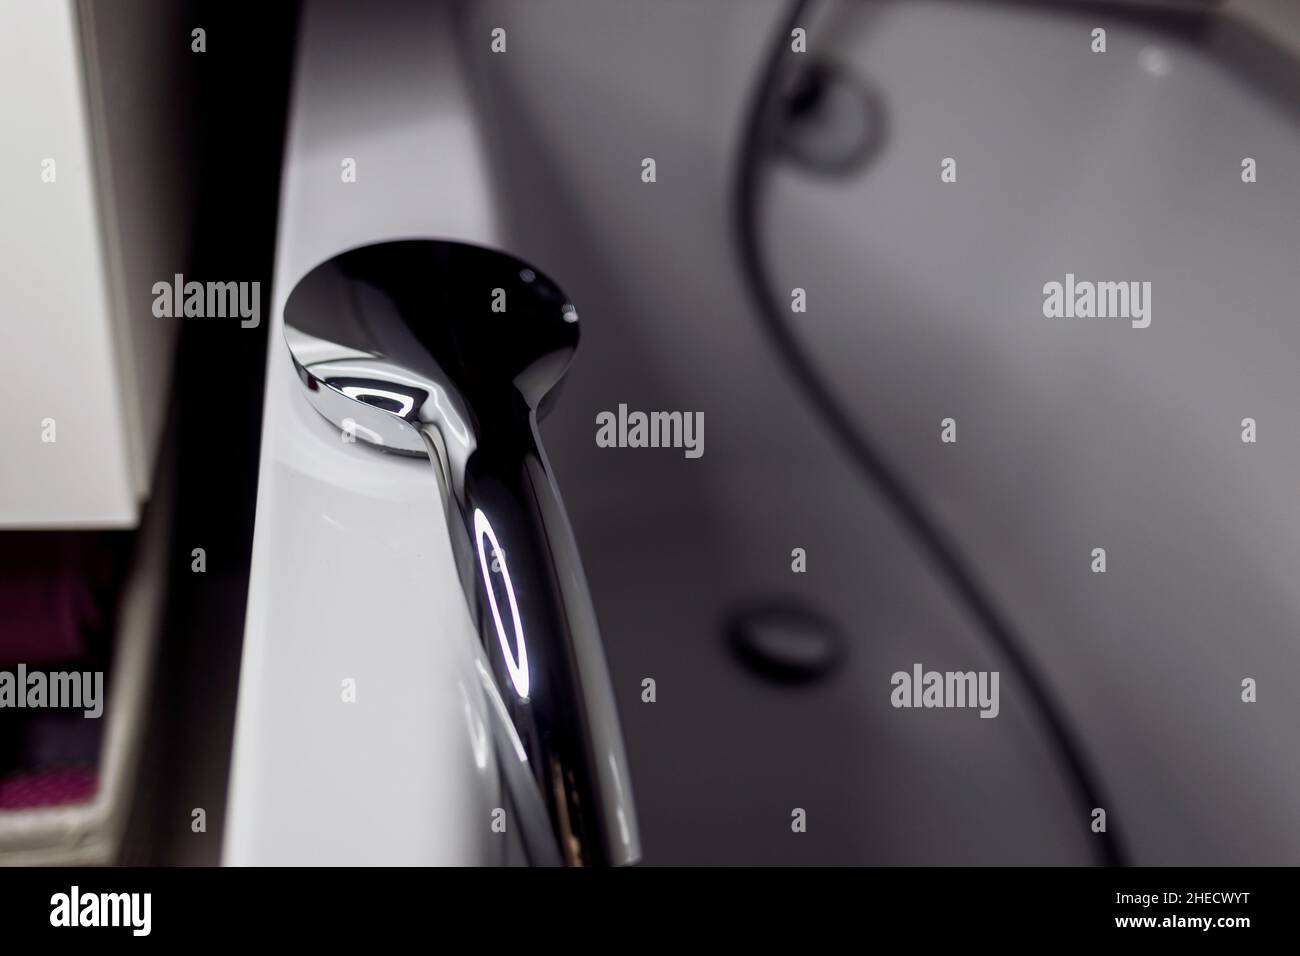 https://c8.alamy.com/comp/2HECWYT/stainless-steel-hand-shower-heads-are-attached-to-a-wall-mount-and-flexible-hose-providing-freedom-to-focus-the-shower-spray-to-desired-body-parts-2HECWYT.jpg